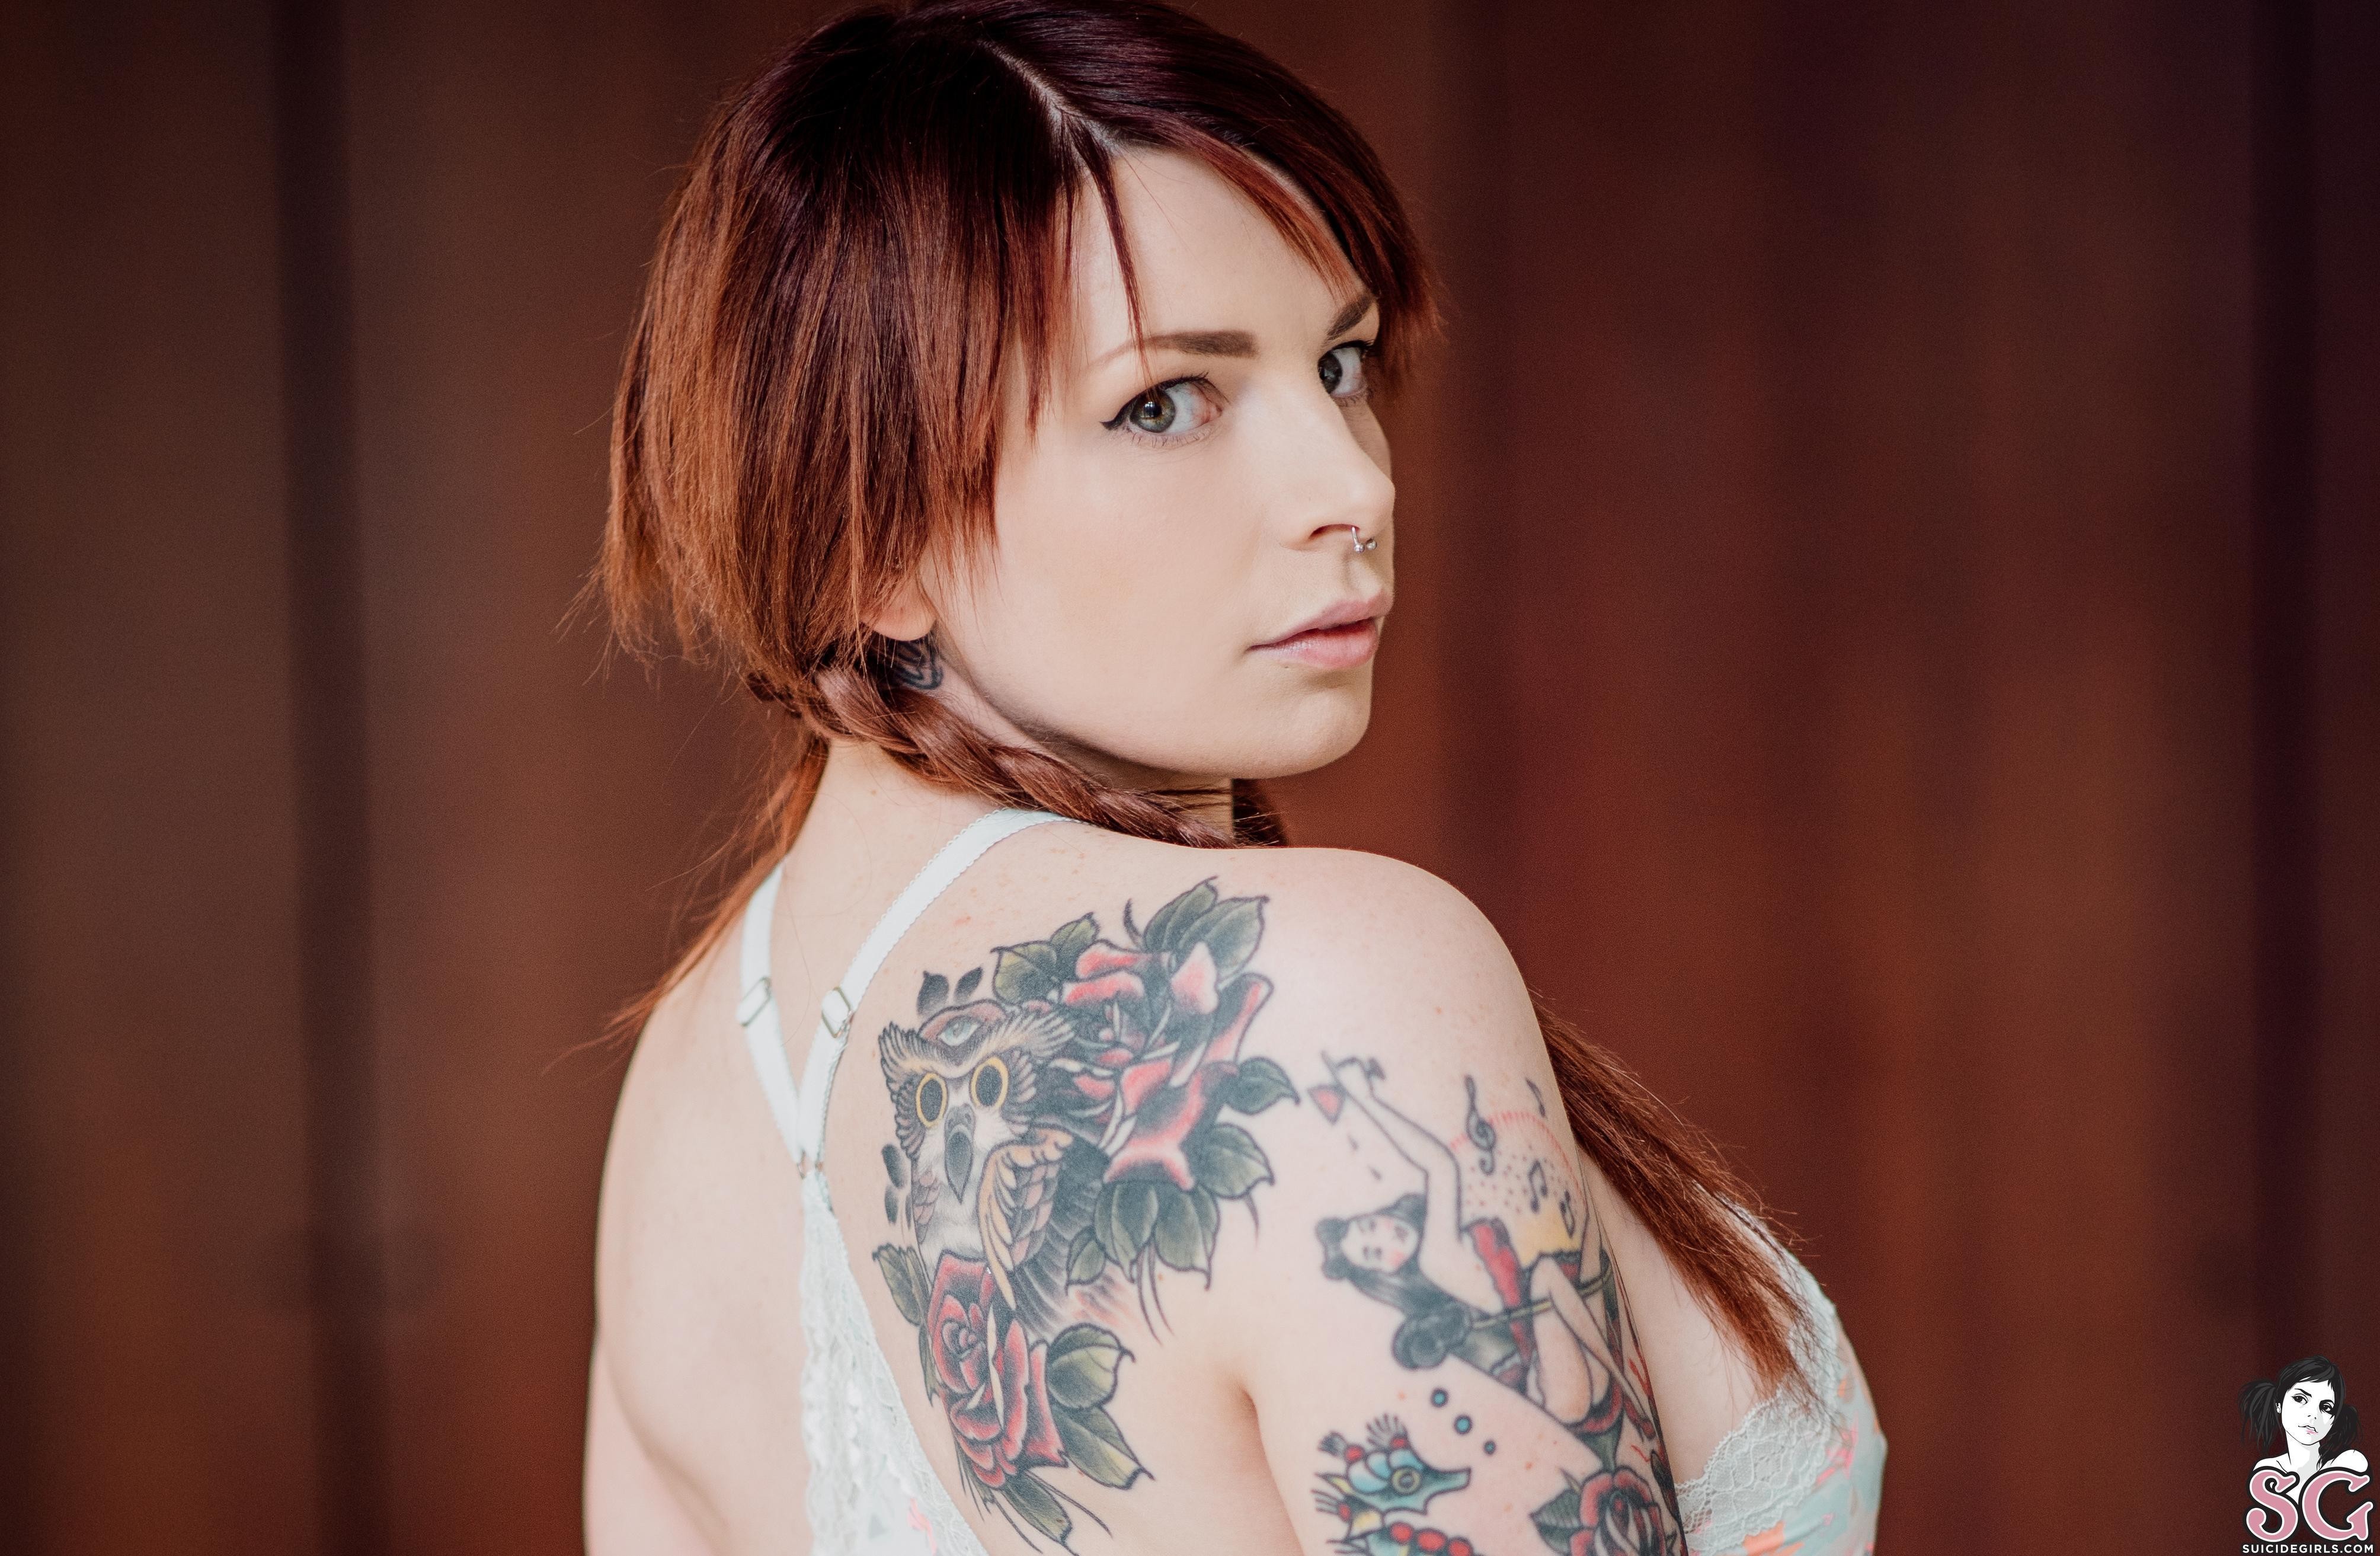 Beautiful Suicide Girl Peggysue How Soon Is Now 10 Big curvy Assets High re...